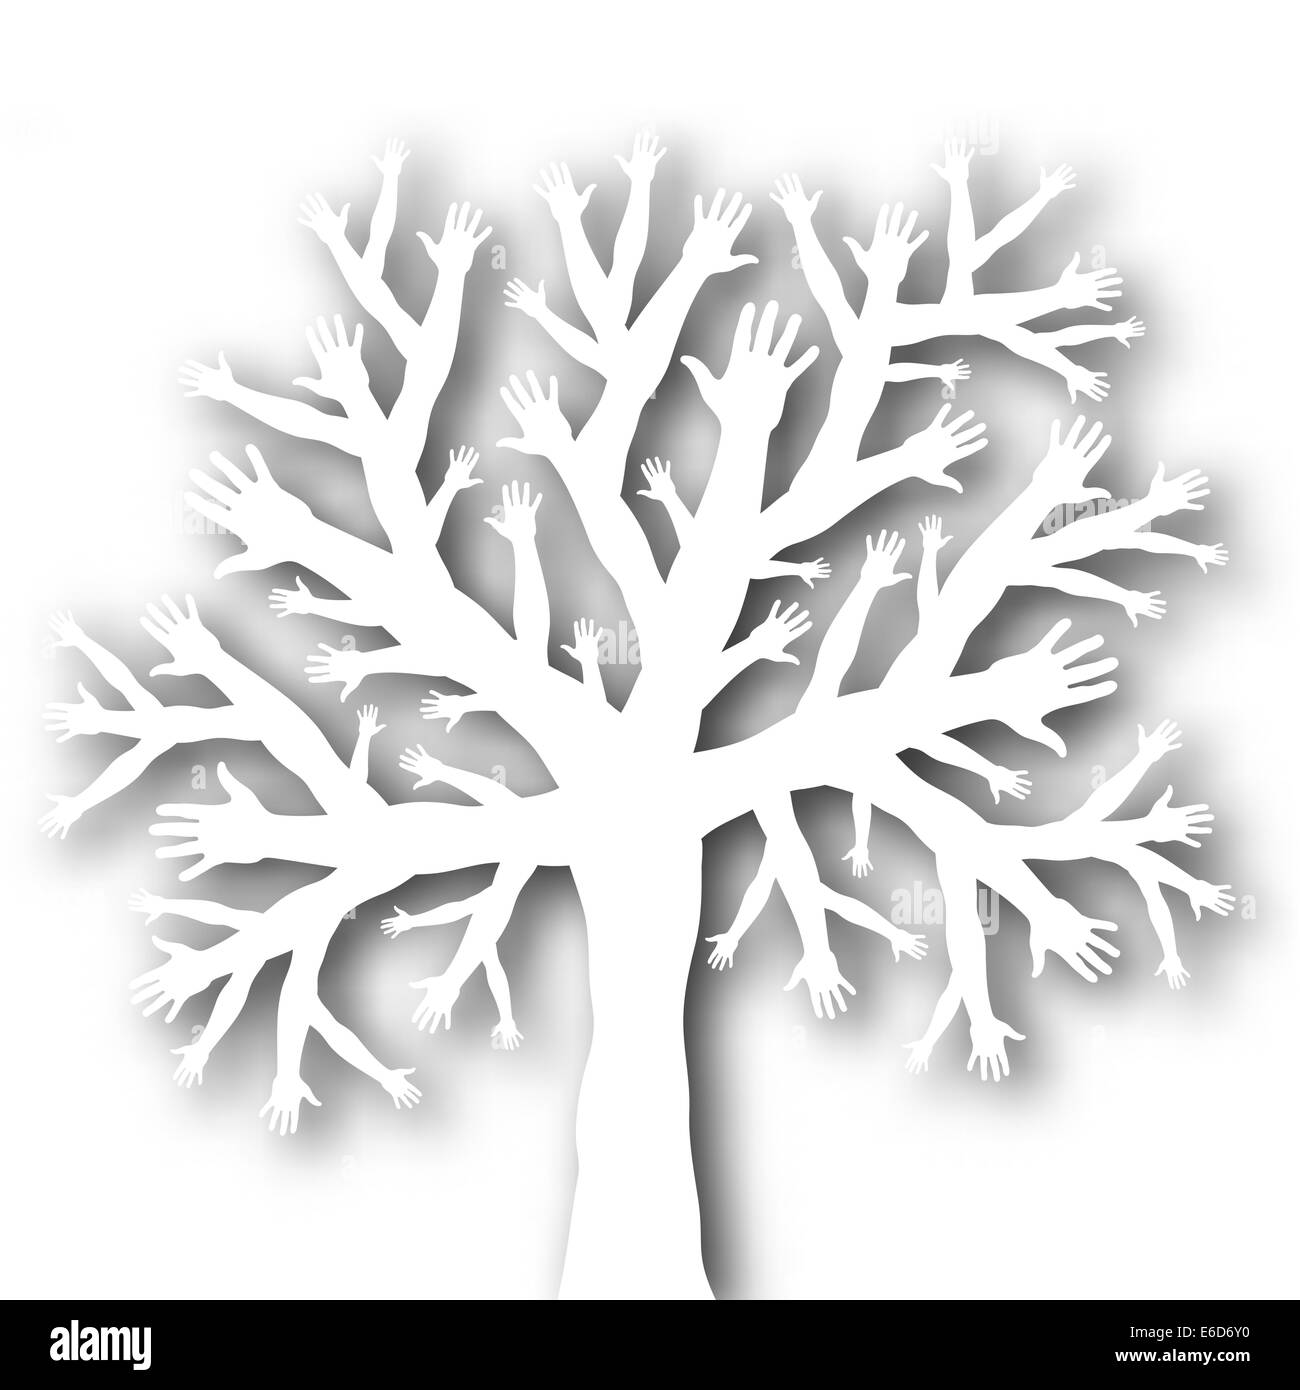 Editable vector cutout of a tree with branches and roots made of hands with background shadow made using a gradient mesh Stock Vector